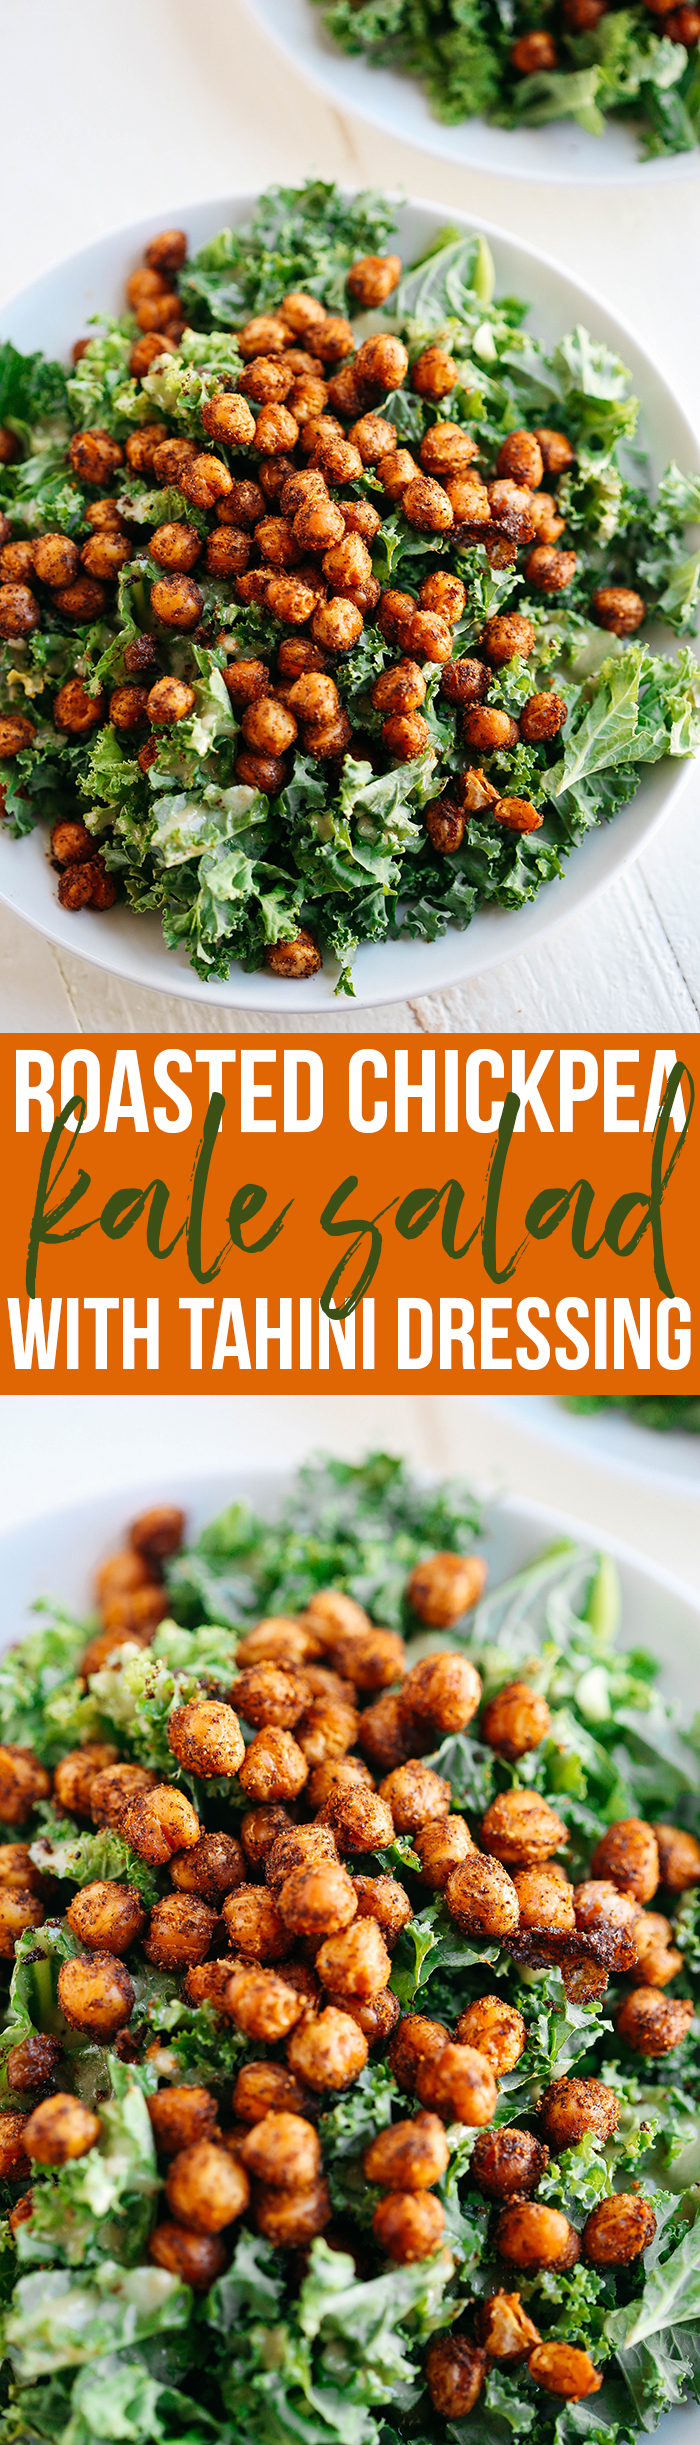 This Roasted Chickpea and Kale Salad with delicious creamy tahini dressing is hearty, healthy and full of so much flavor!